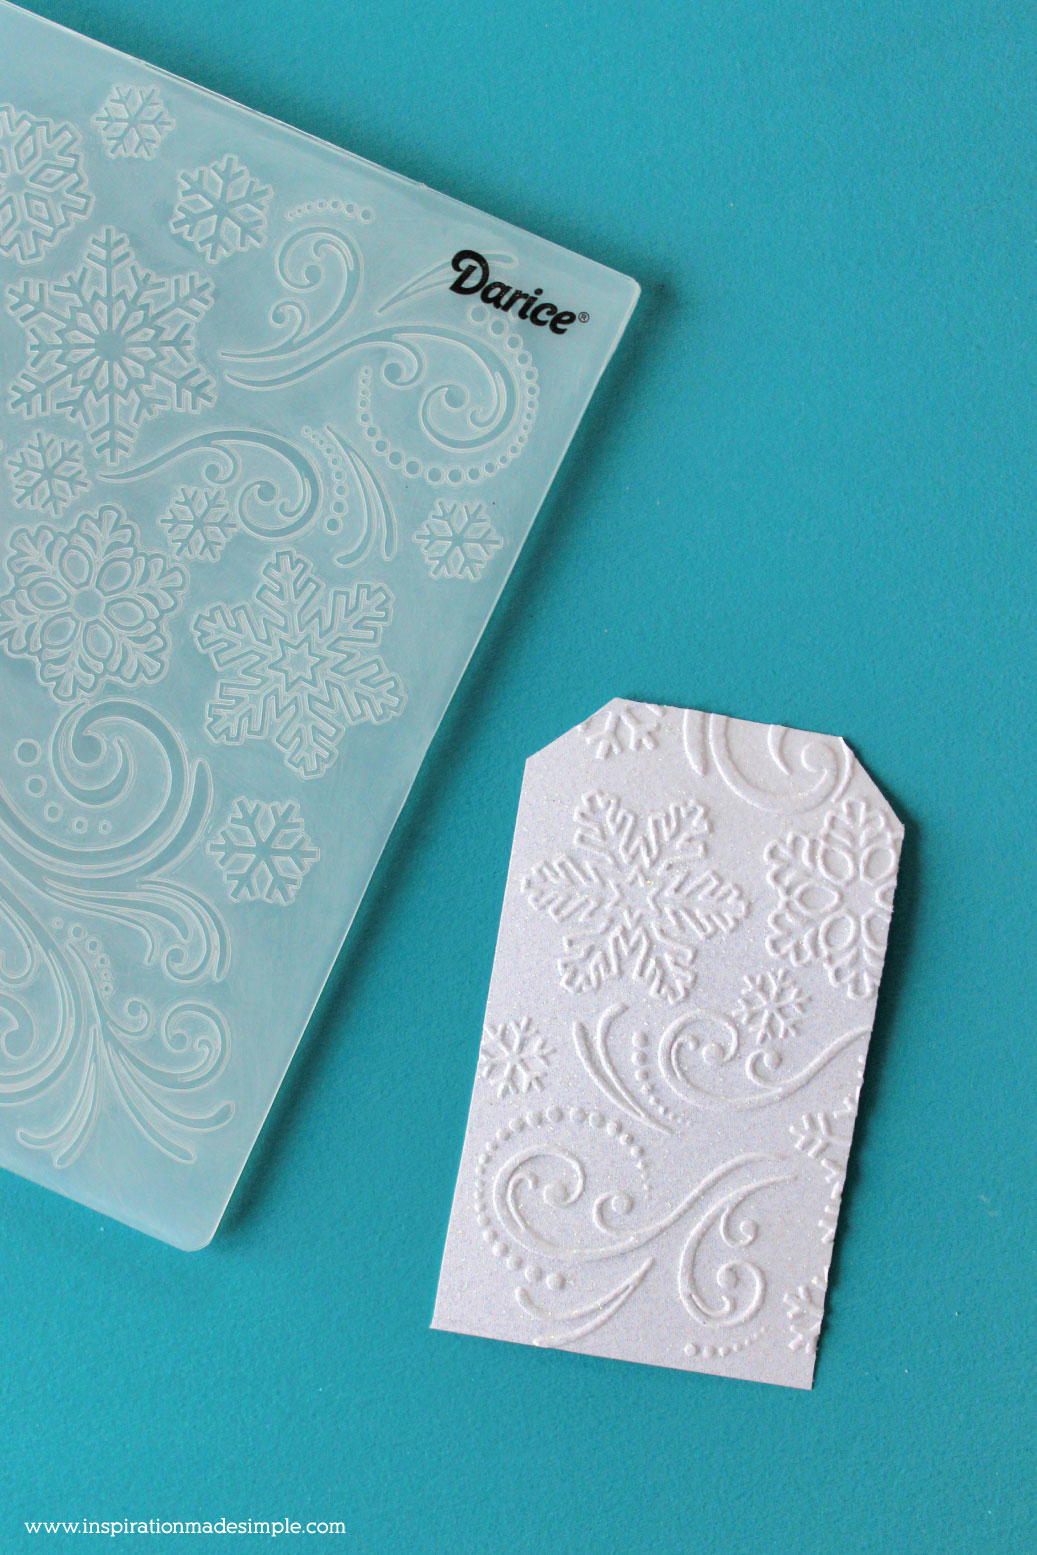 Simple and Classic DIY Embossed Gift Tags